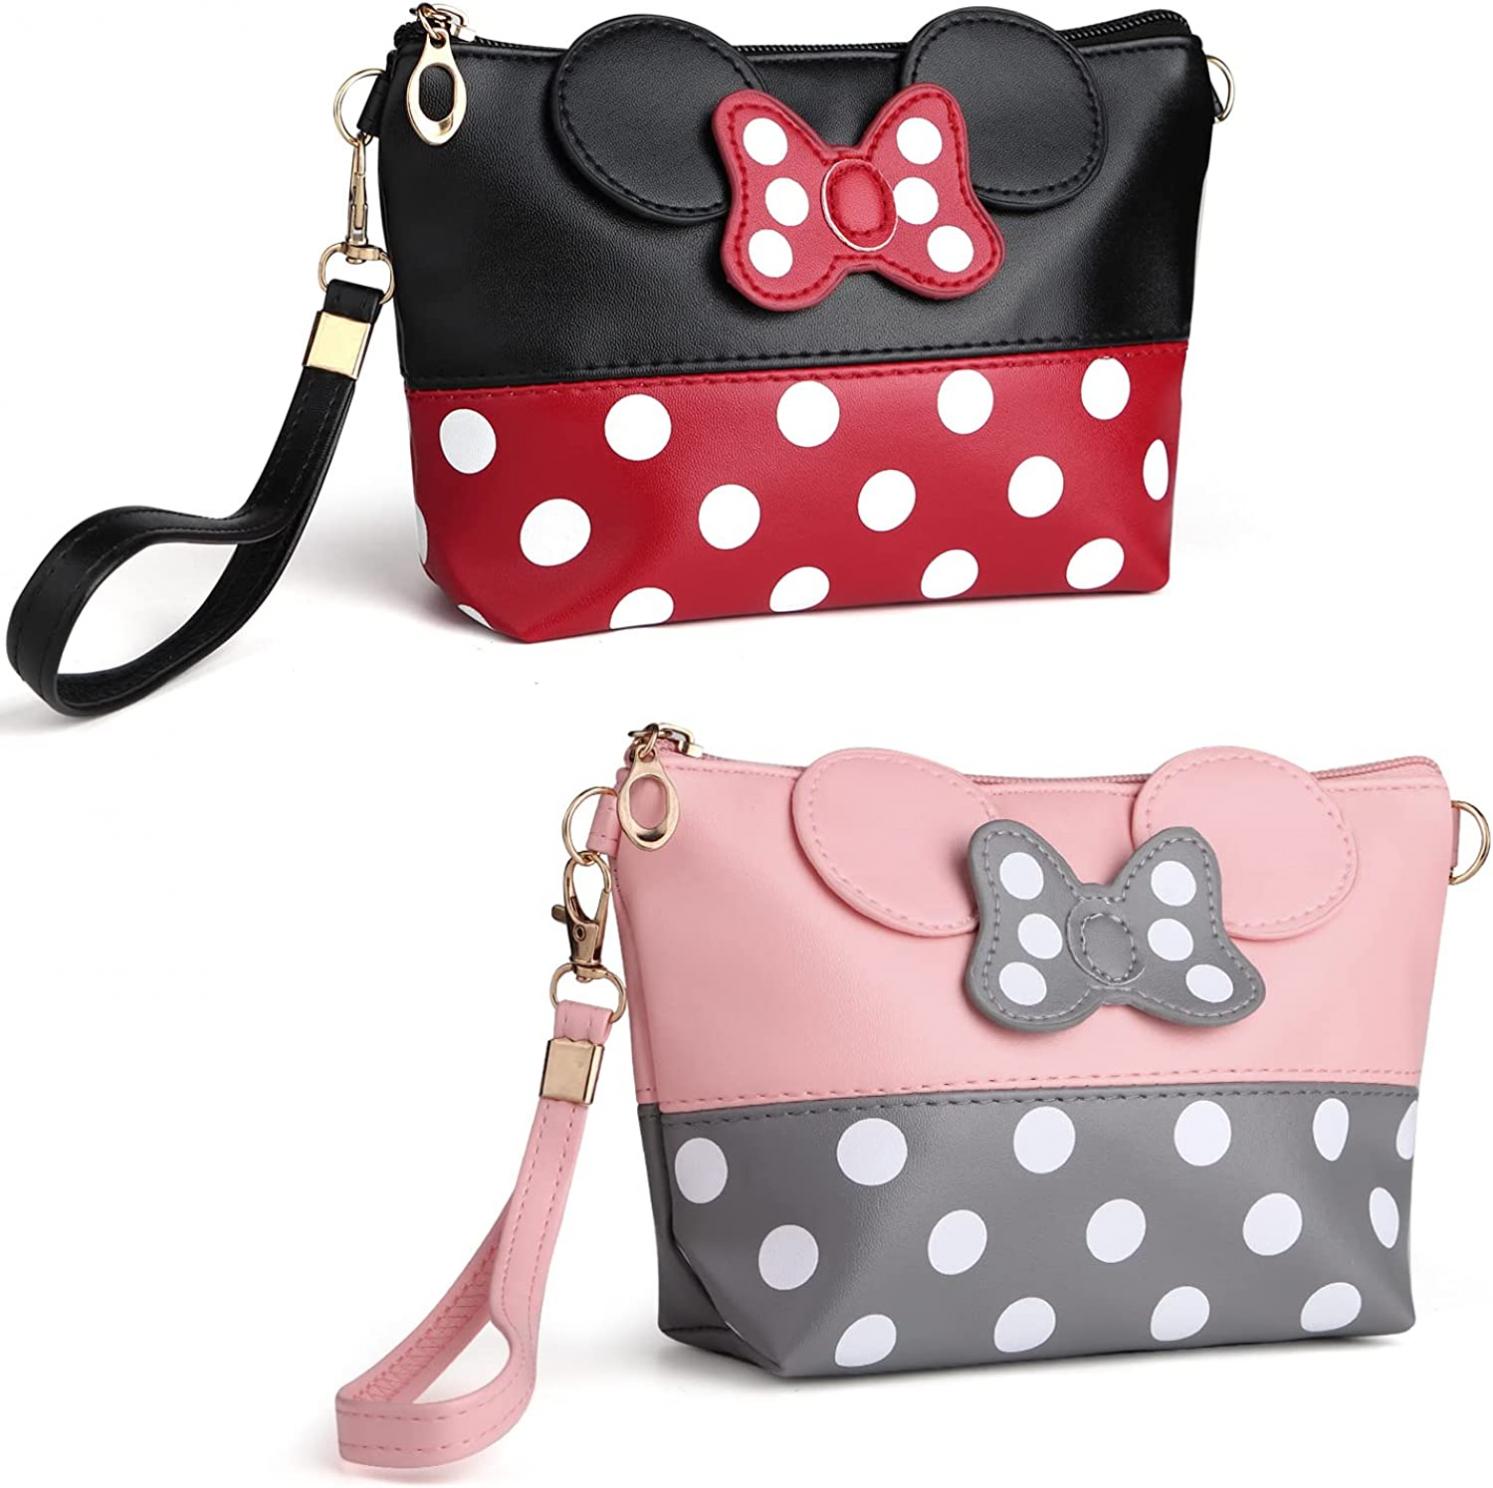 yiwoo 2 Pack Cosmetic Bag Mouse Ears Bag with Zipper,Cartoon Leather Travel Makeup Handbag with Ears and Bow-knot, Cute Portable Cosmetic Bag Toiletry Pouch for Women Teen Girls Kids（Pink&Black）